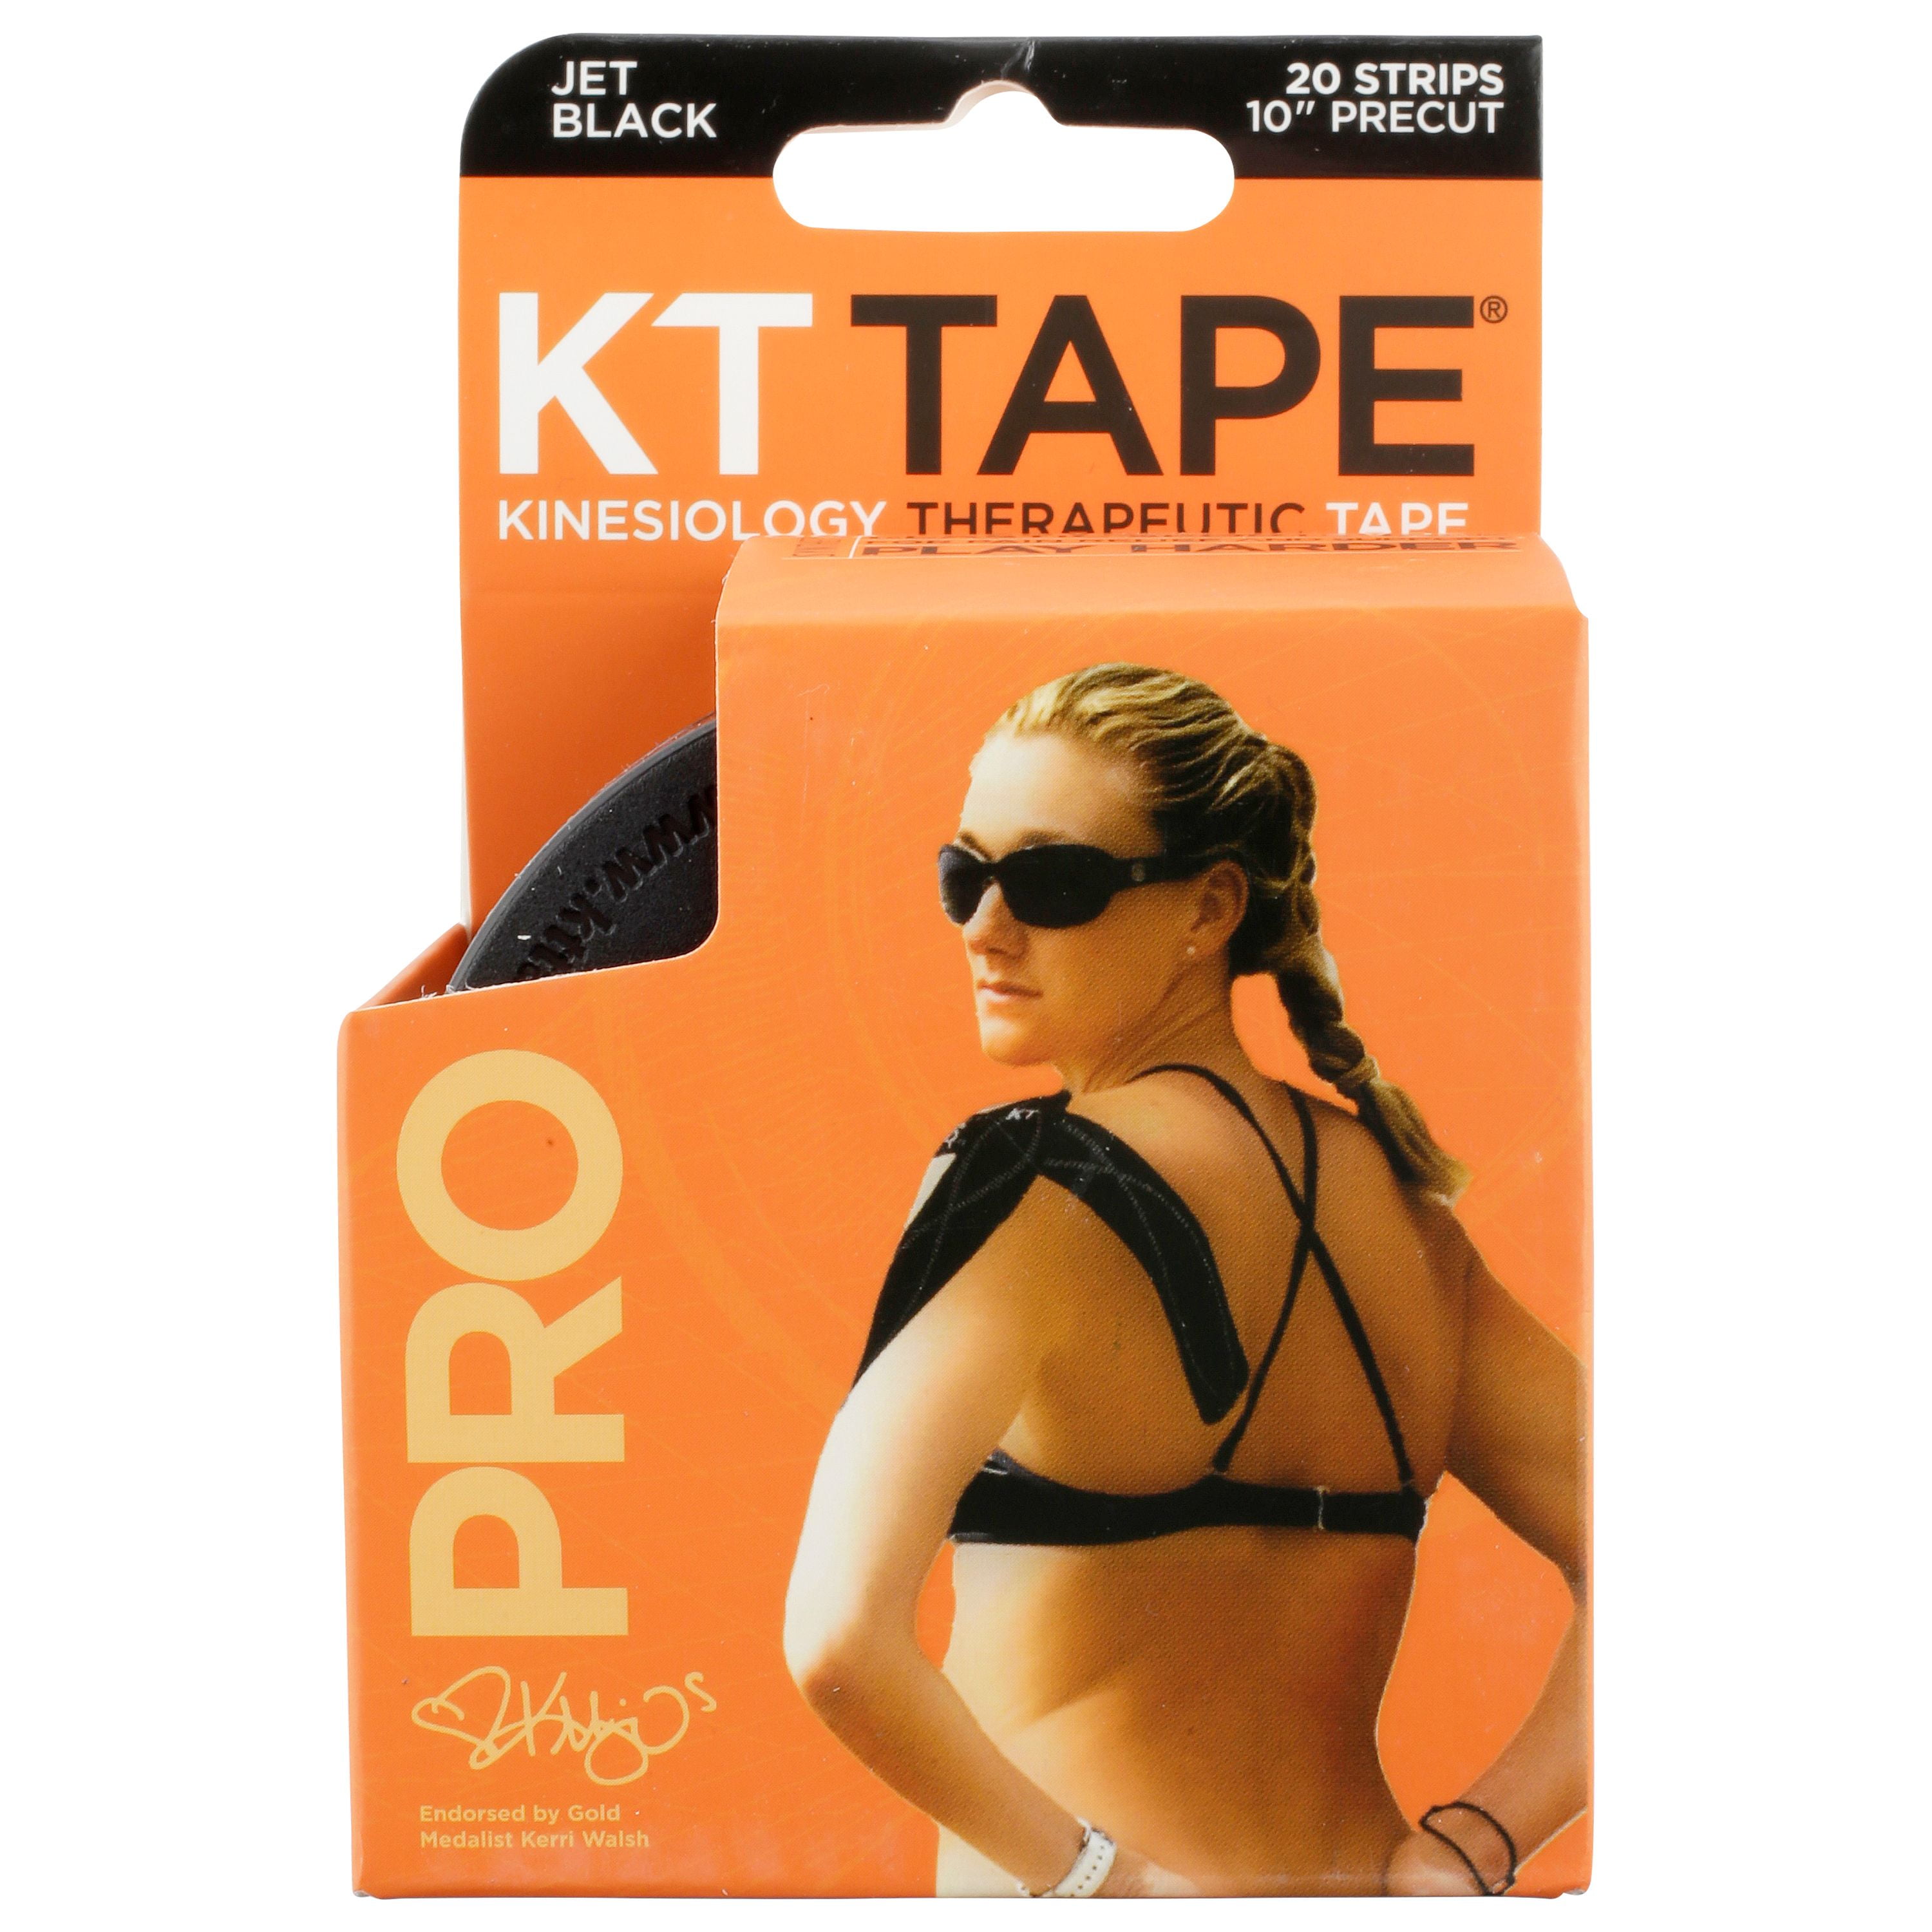 KT Tape Pro 5 Strip Fast Pack Synthetic Precut Kinesiology Tape 